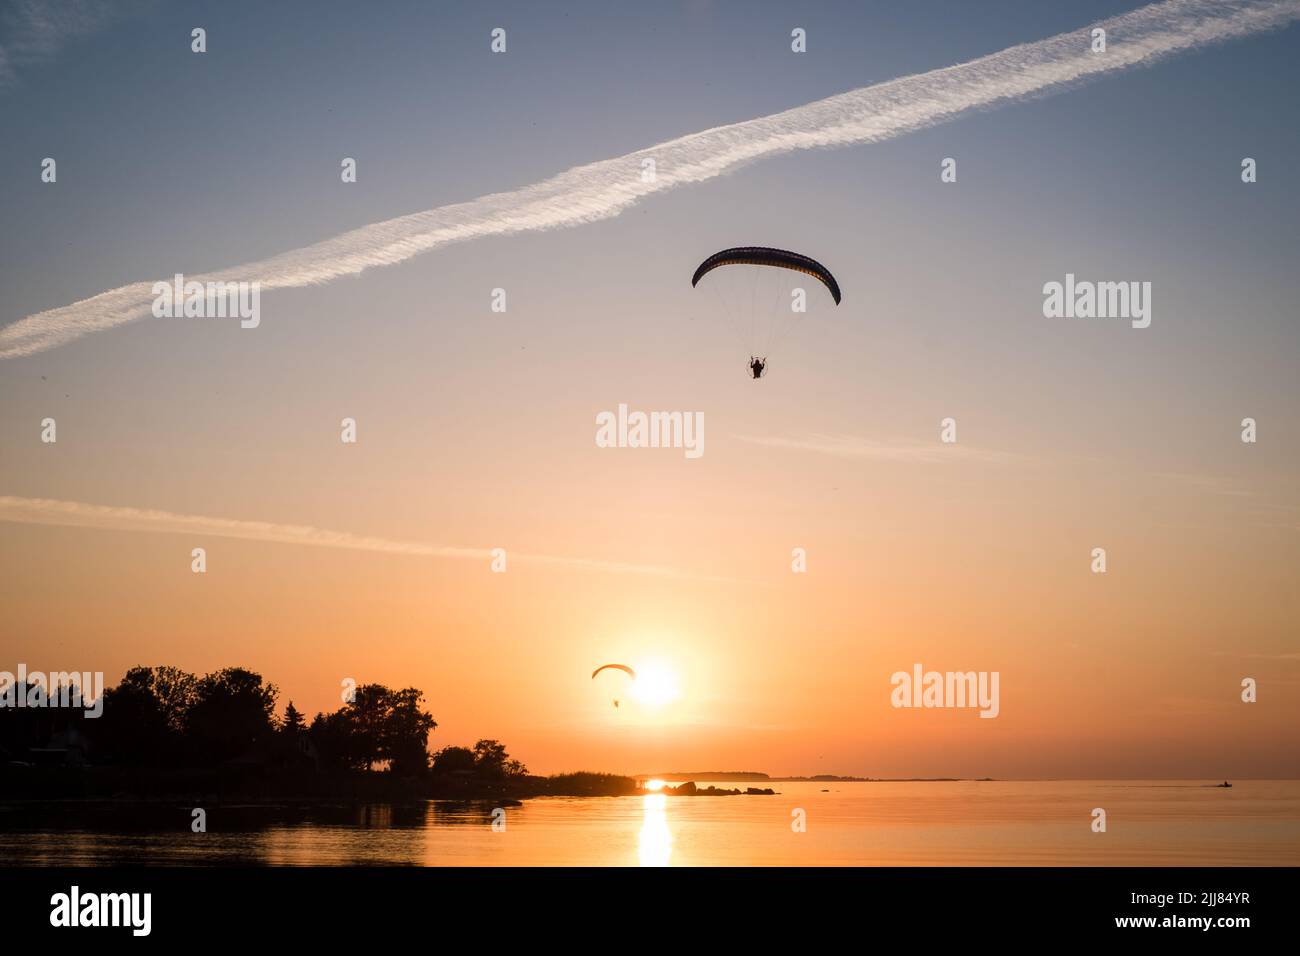 Two paraglider pilots fly in the sky during sunset on beautiful beach. Paraplanes silhouettes. Adventure vacation and travel concept. Stock Photo